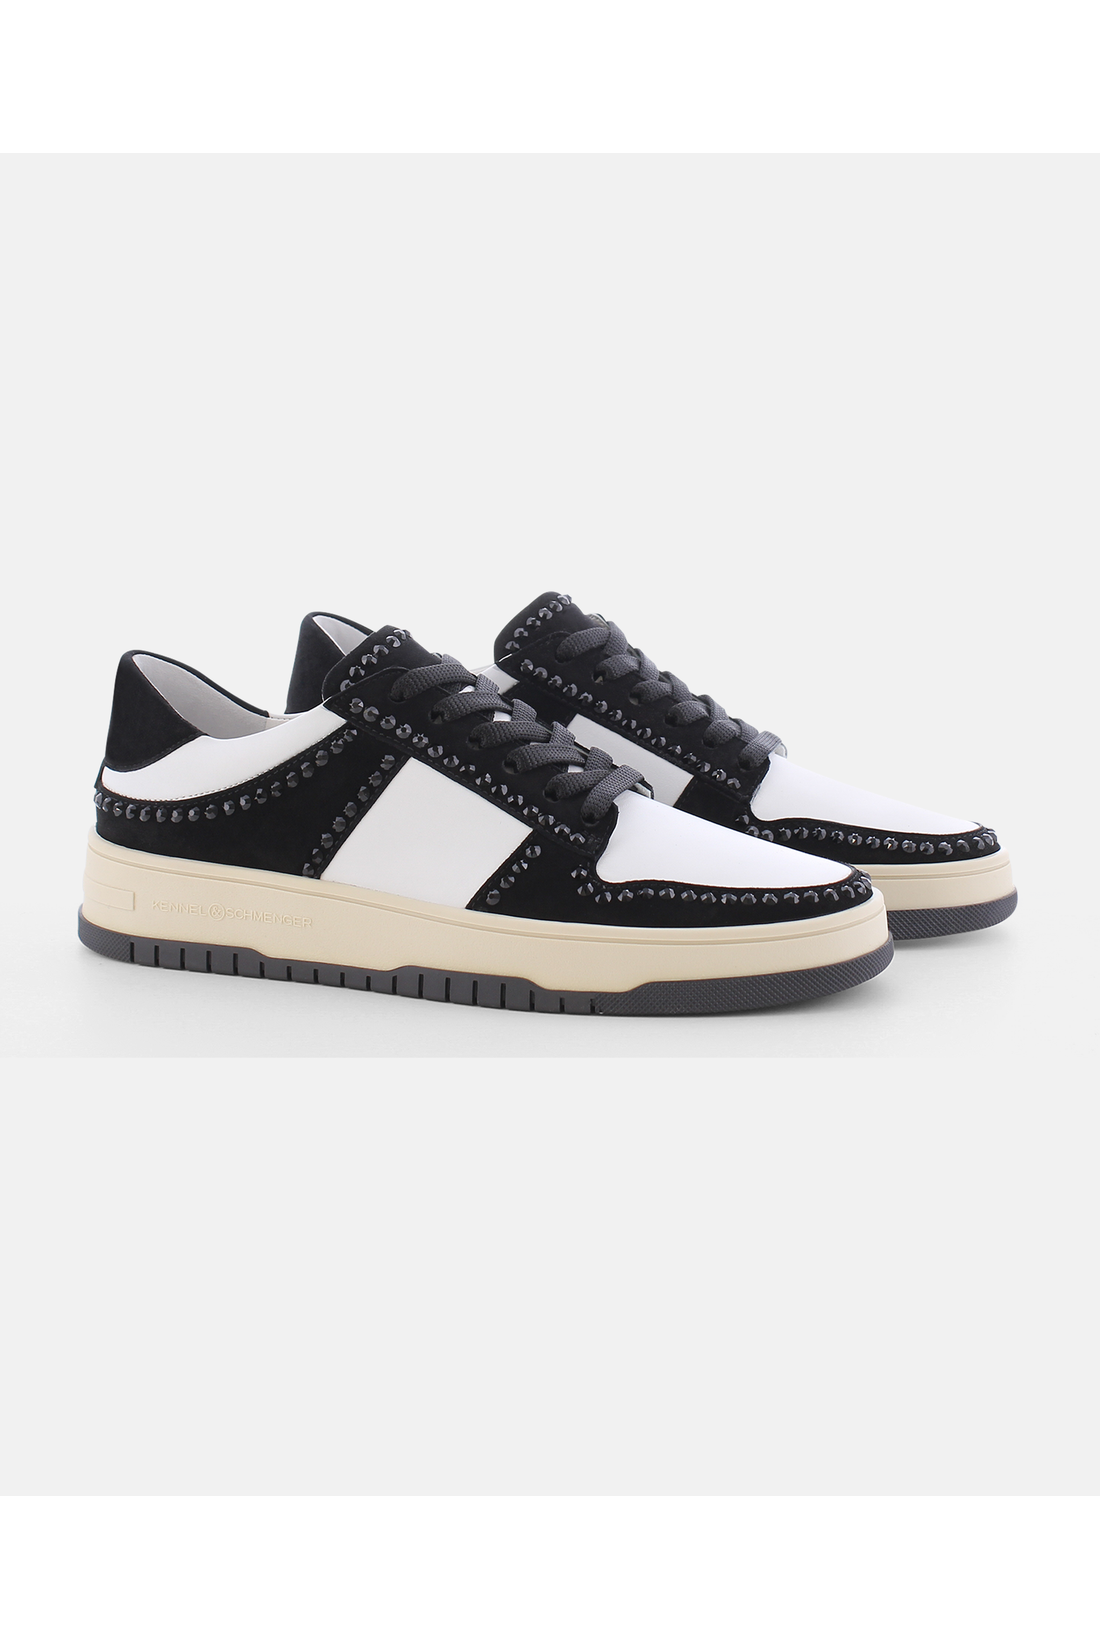 Kennel-Schmenger-OUTLET-SALE-DRIFT-Sneakers-2_5-35-Schwarz-ARCHIVE-COLLECTION.png